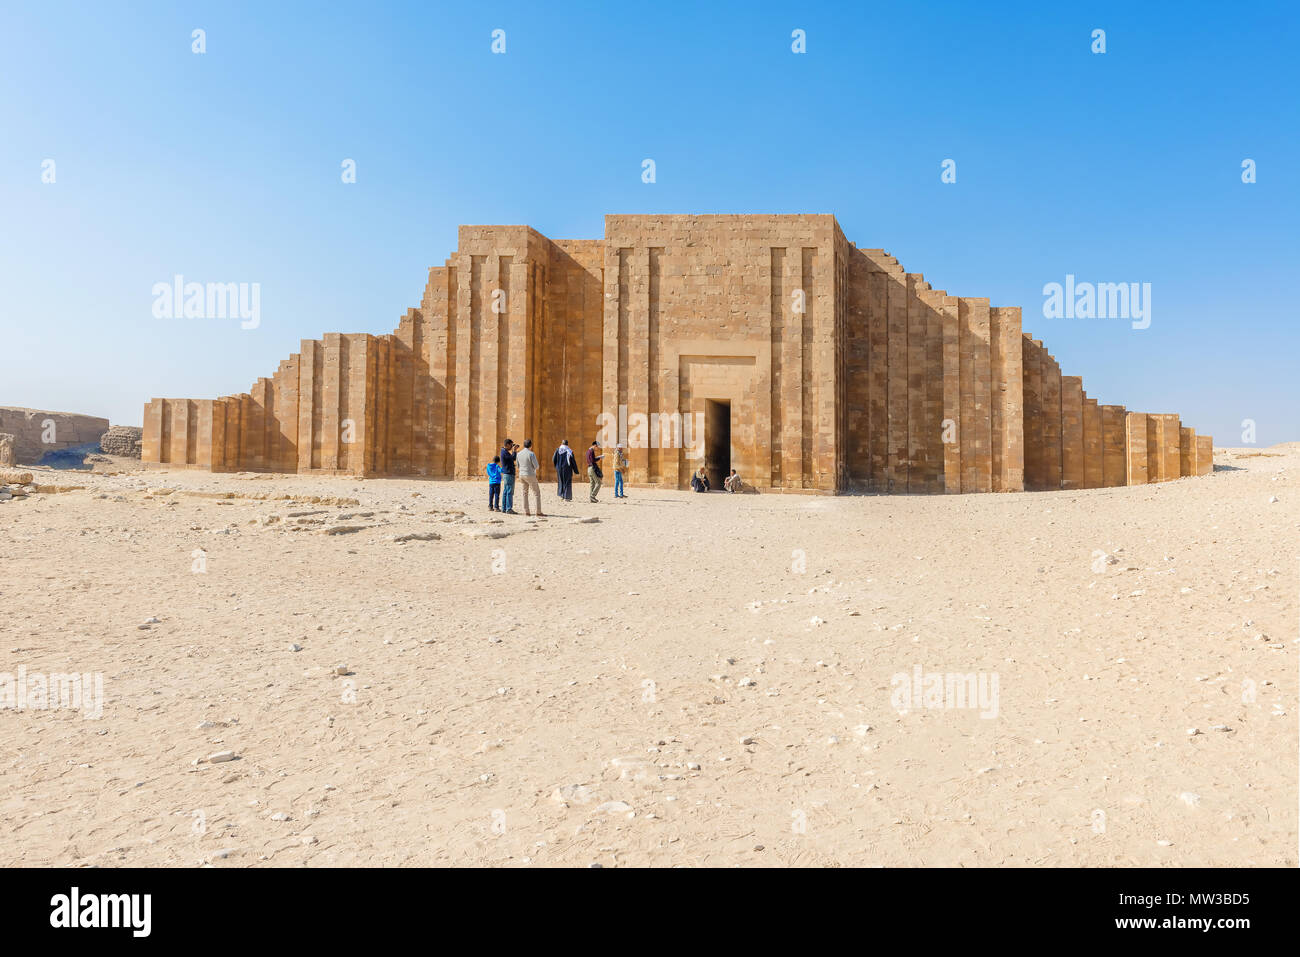 Saqqara, Egypt - December 31, 2014: Tourists in front of  the Saqqara Necropolis, which is a UNESCO World Heritage located near Cairo, Egypt Stock Photo